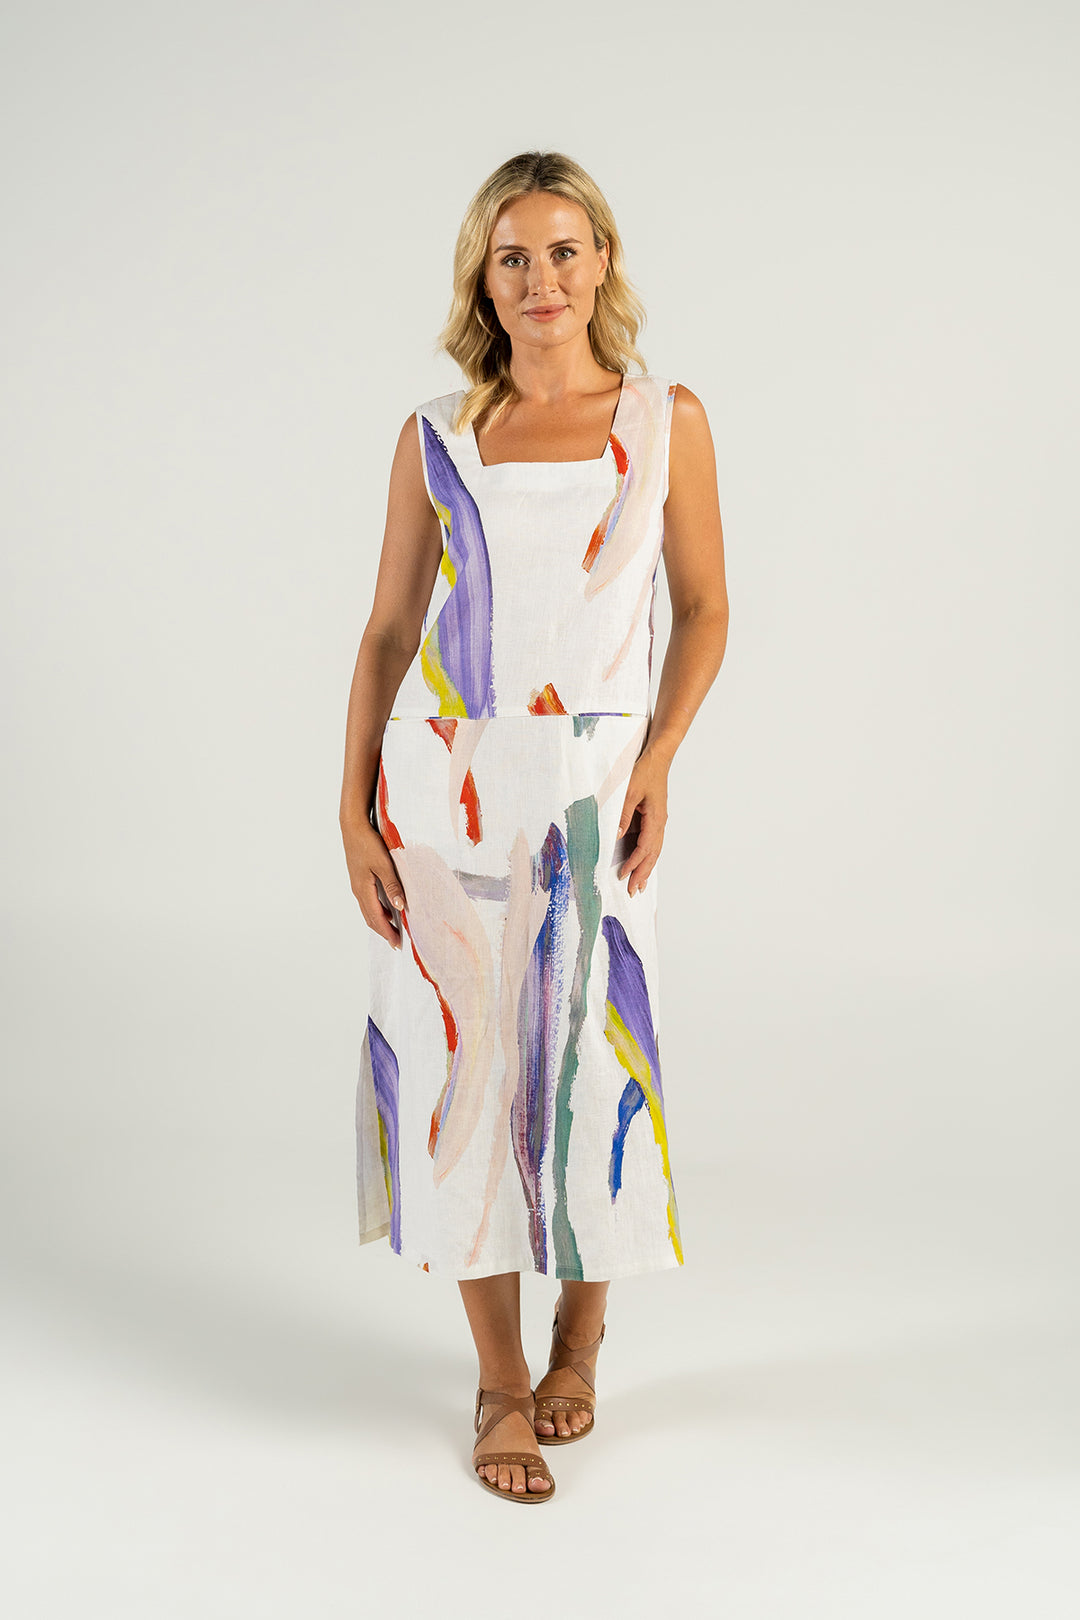 Woman wearing a white linen dress with splashes of colour front view from Pizazz Boutique Nelson Bay Dress Shop